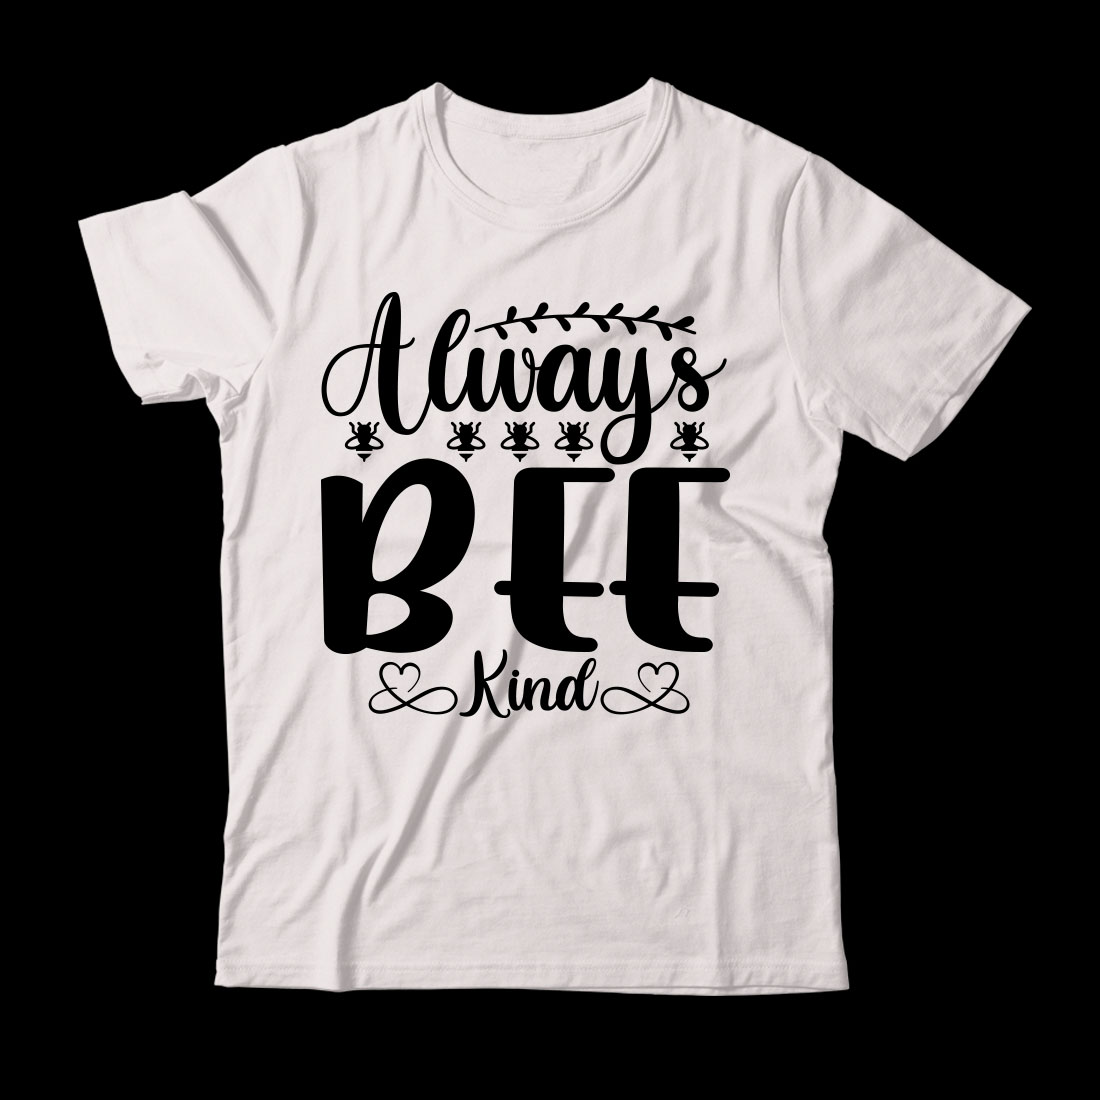 White t - shirt that says always be kind.